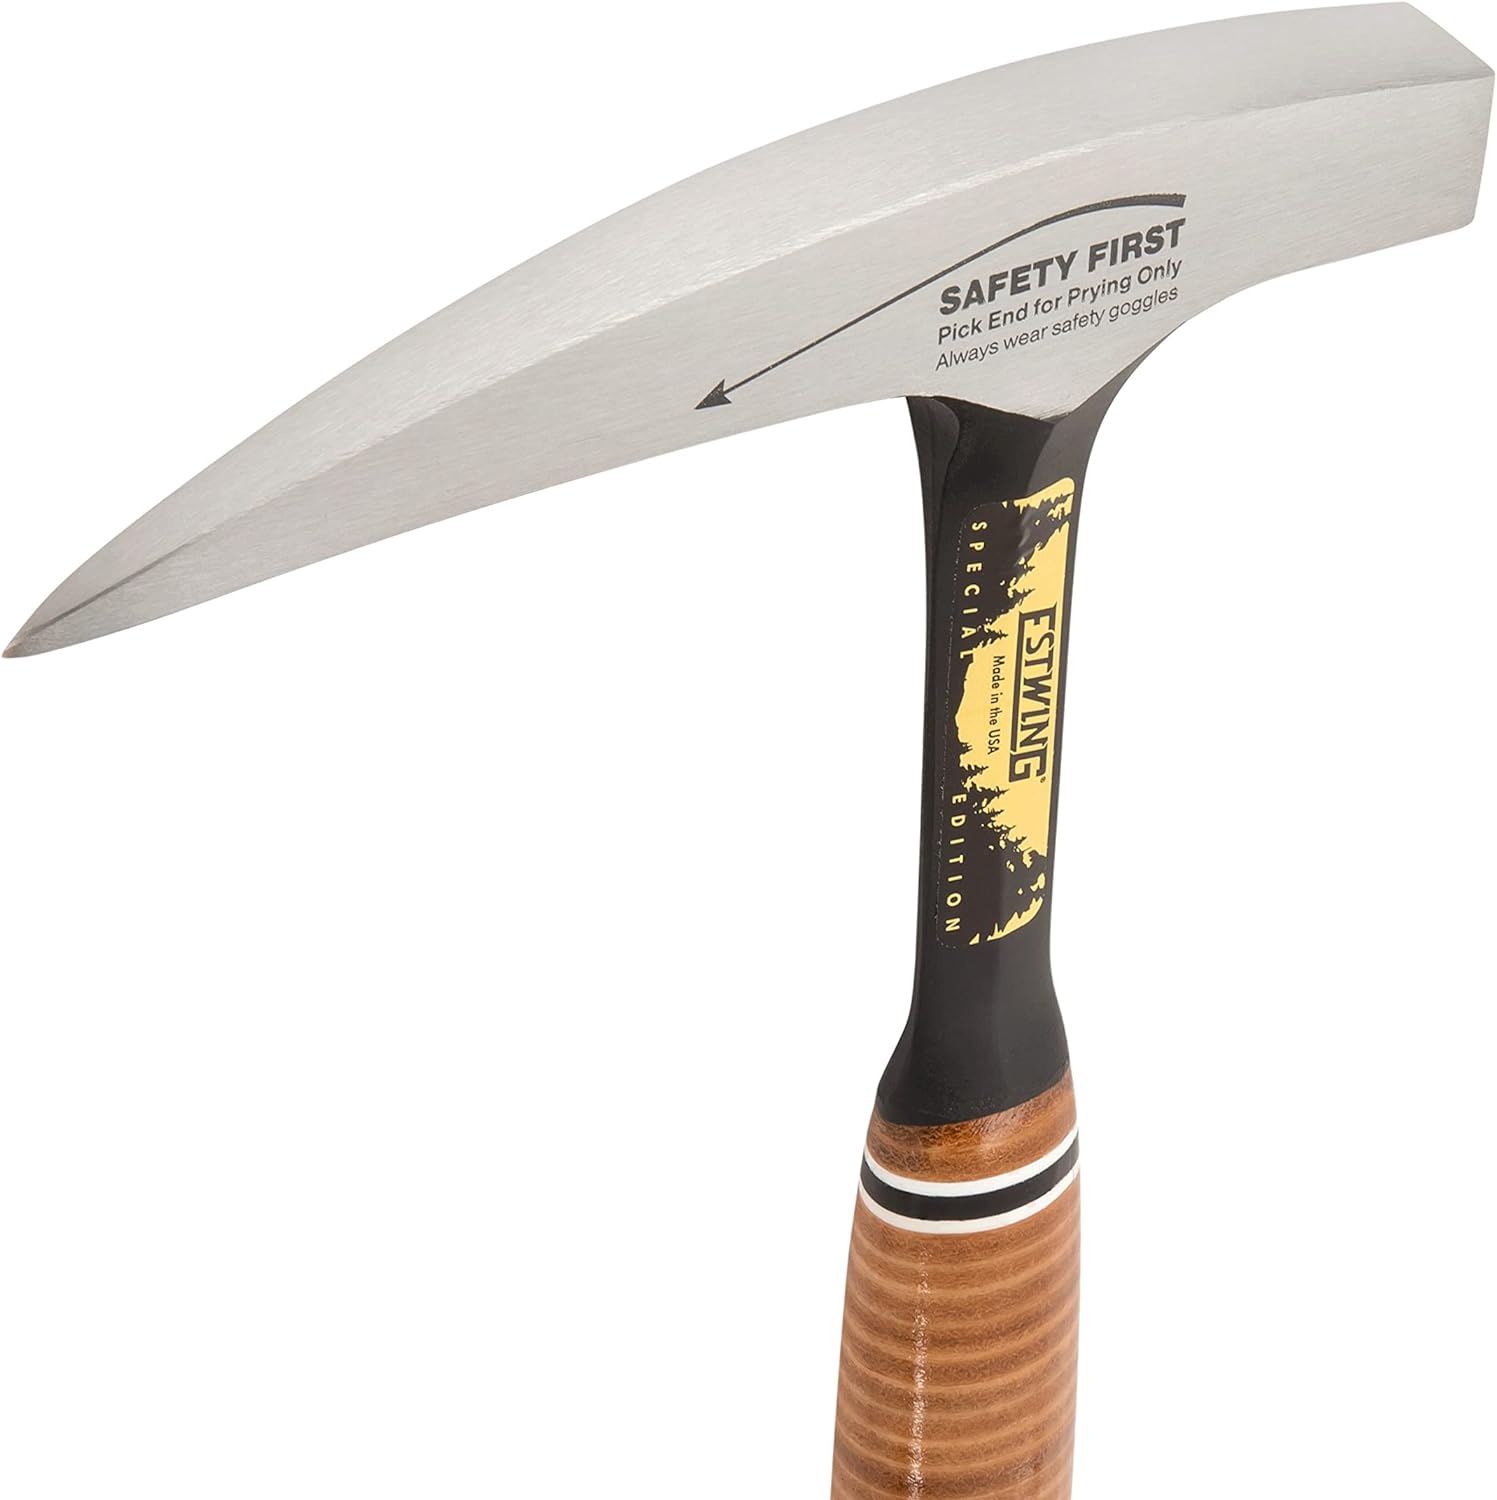 ESTWING Special Edition Rock Pick - 22 oz Geology Hammer with Pointed Tip & Genuine Leather Grip - E30SE